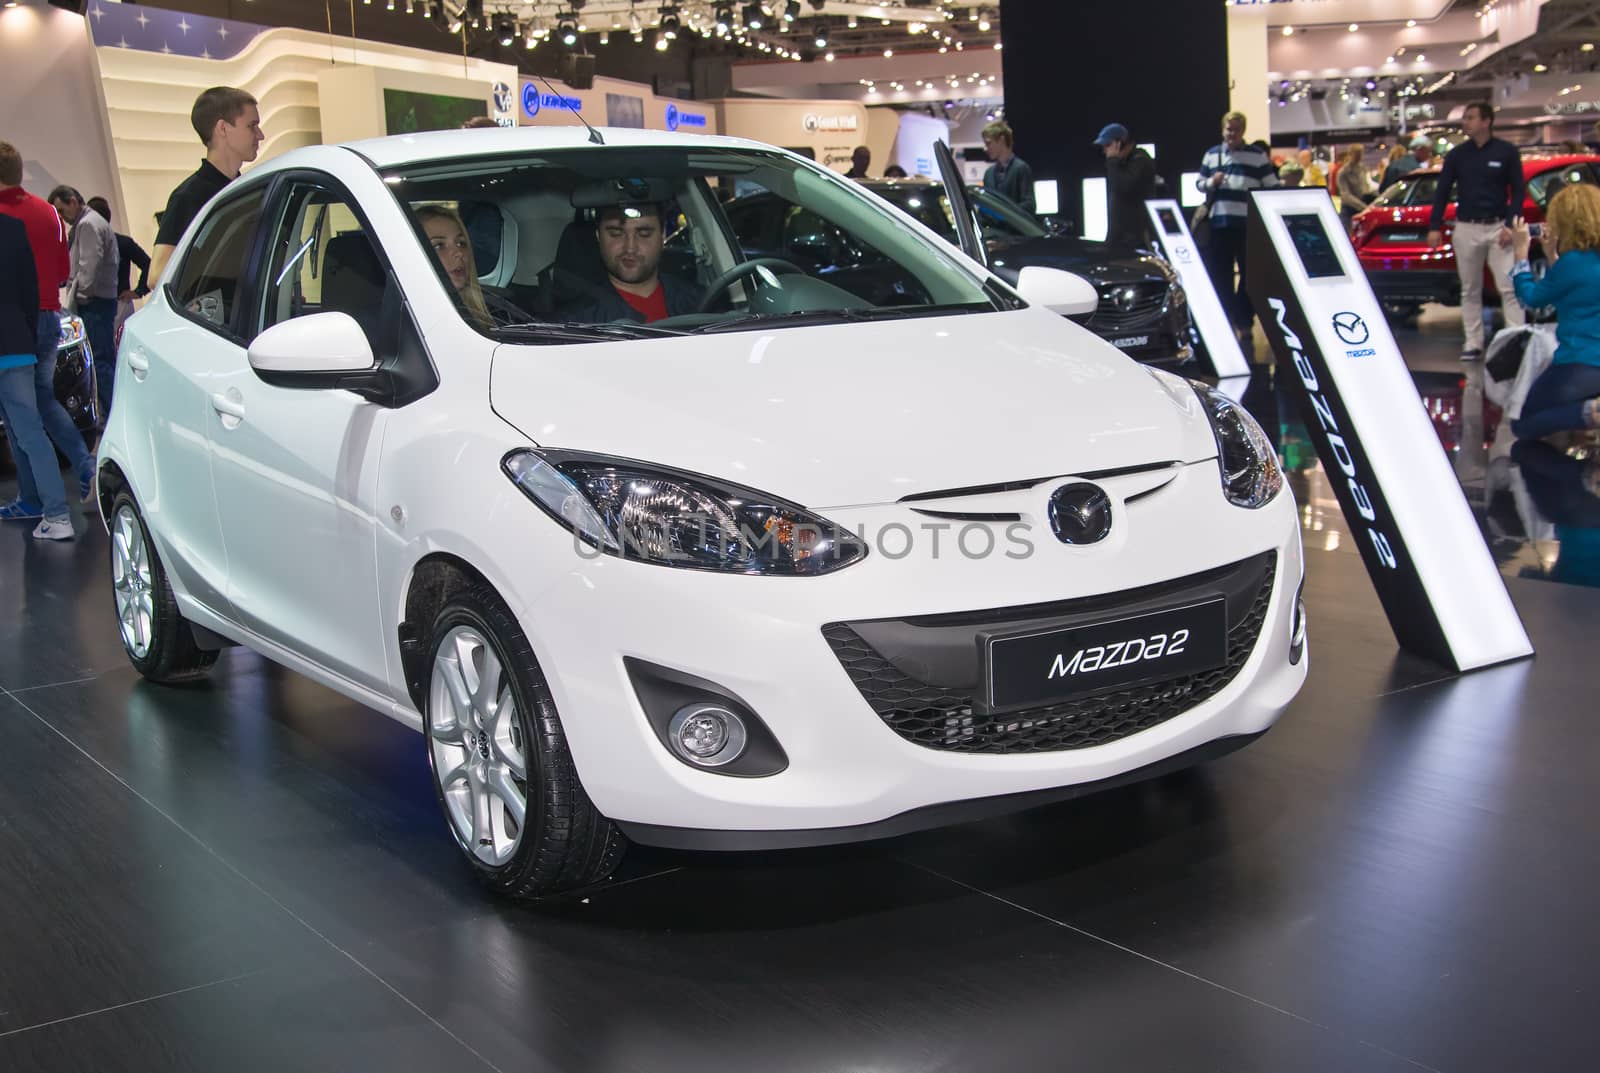 Moscow-September 2: Mazda 2 at the Moscow International Automobile Salon on September 2, 2014 in Moscow